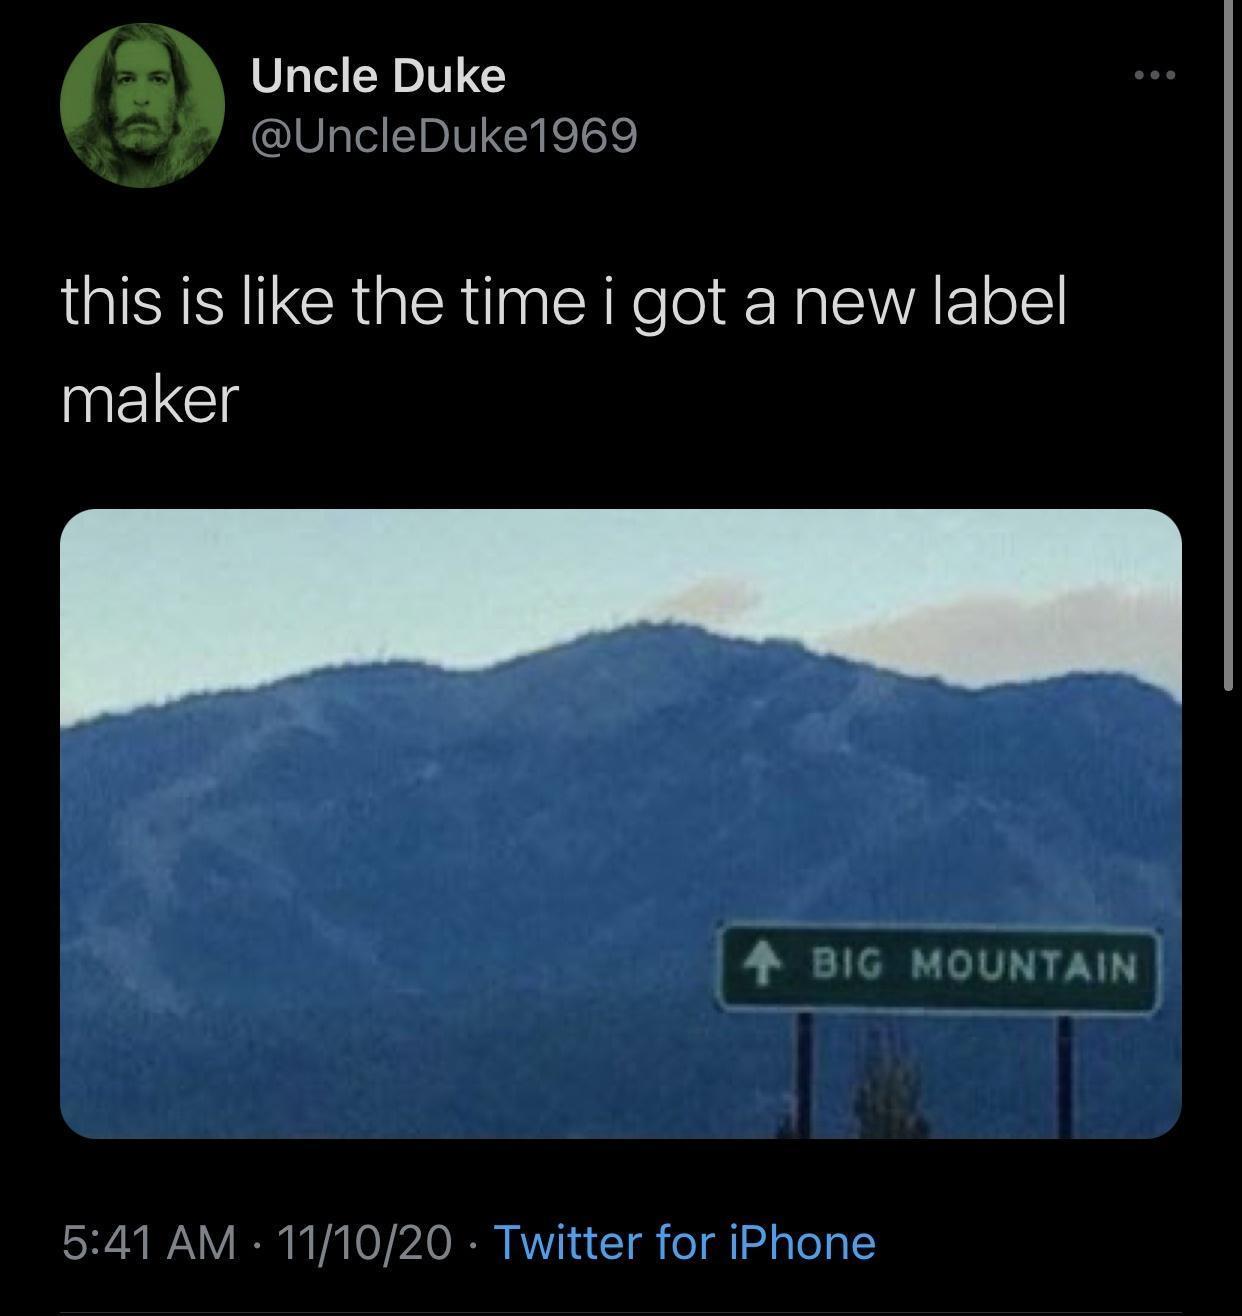 sky - Uncle Duke this is the time i got a new label maker Big Mountain 111020 Twitter for iPhone